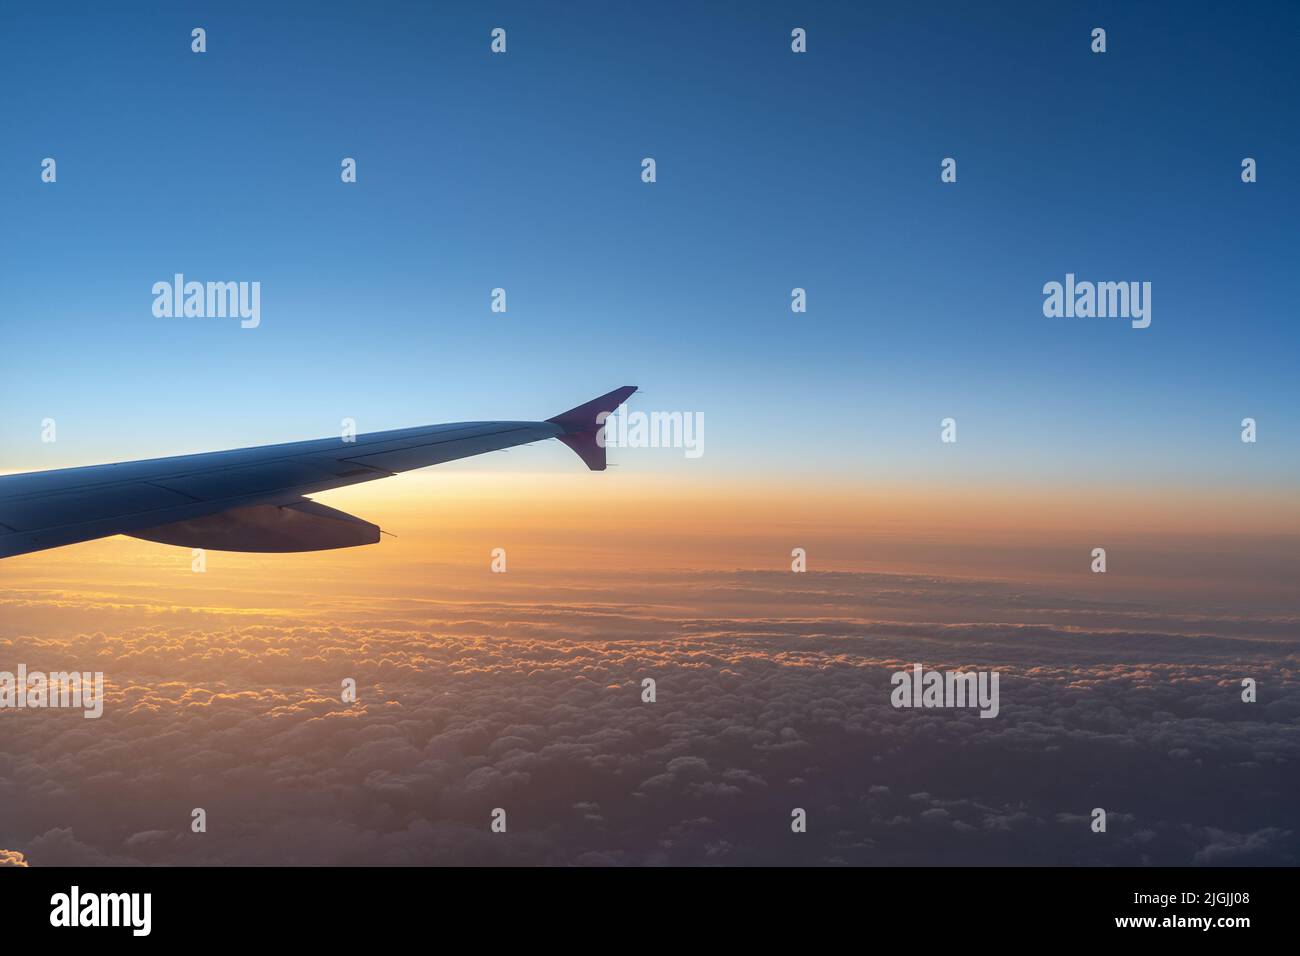 Up in the air, view of aircraft wing silhouette with dark blue sky horizon and cloud background in sun rise or sunset time from airplane window. Stock Photo